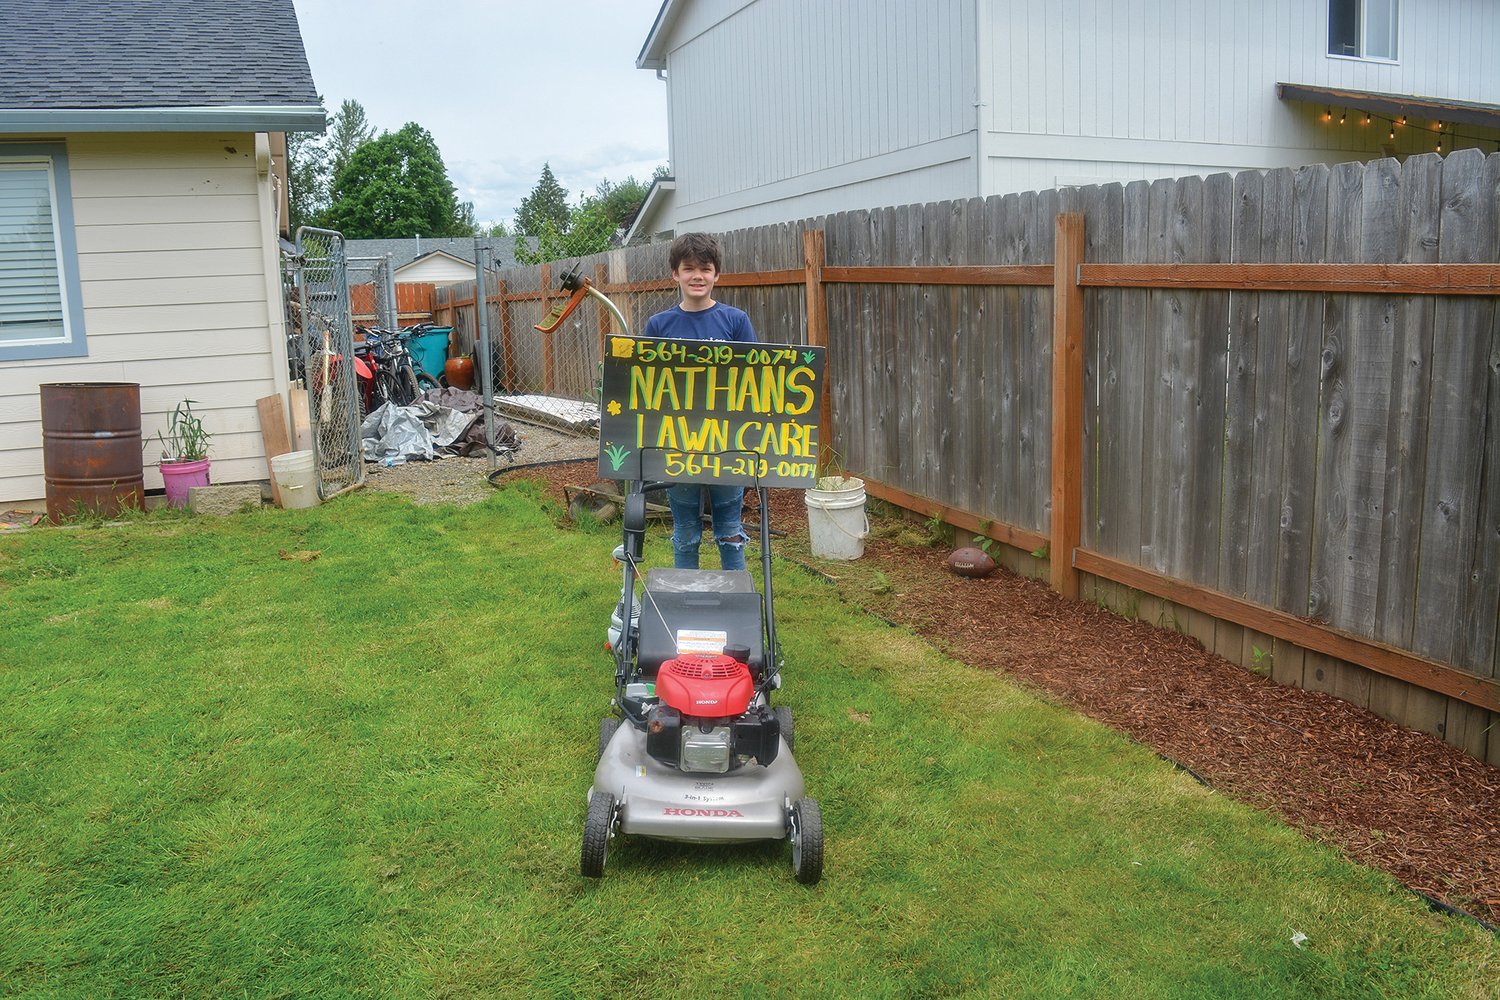 Nathan Pascu is pictured with his lawnmower and weed whacker at his grandmother’s house with his Nathan’s Lawn Care sign on June 1.